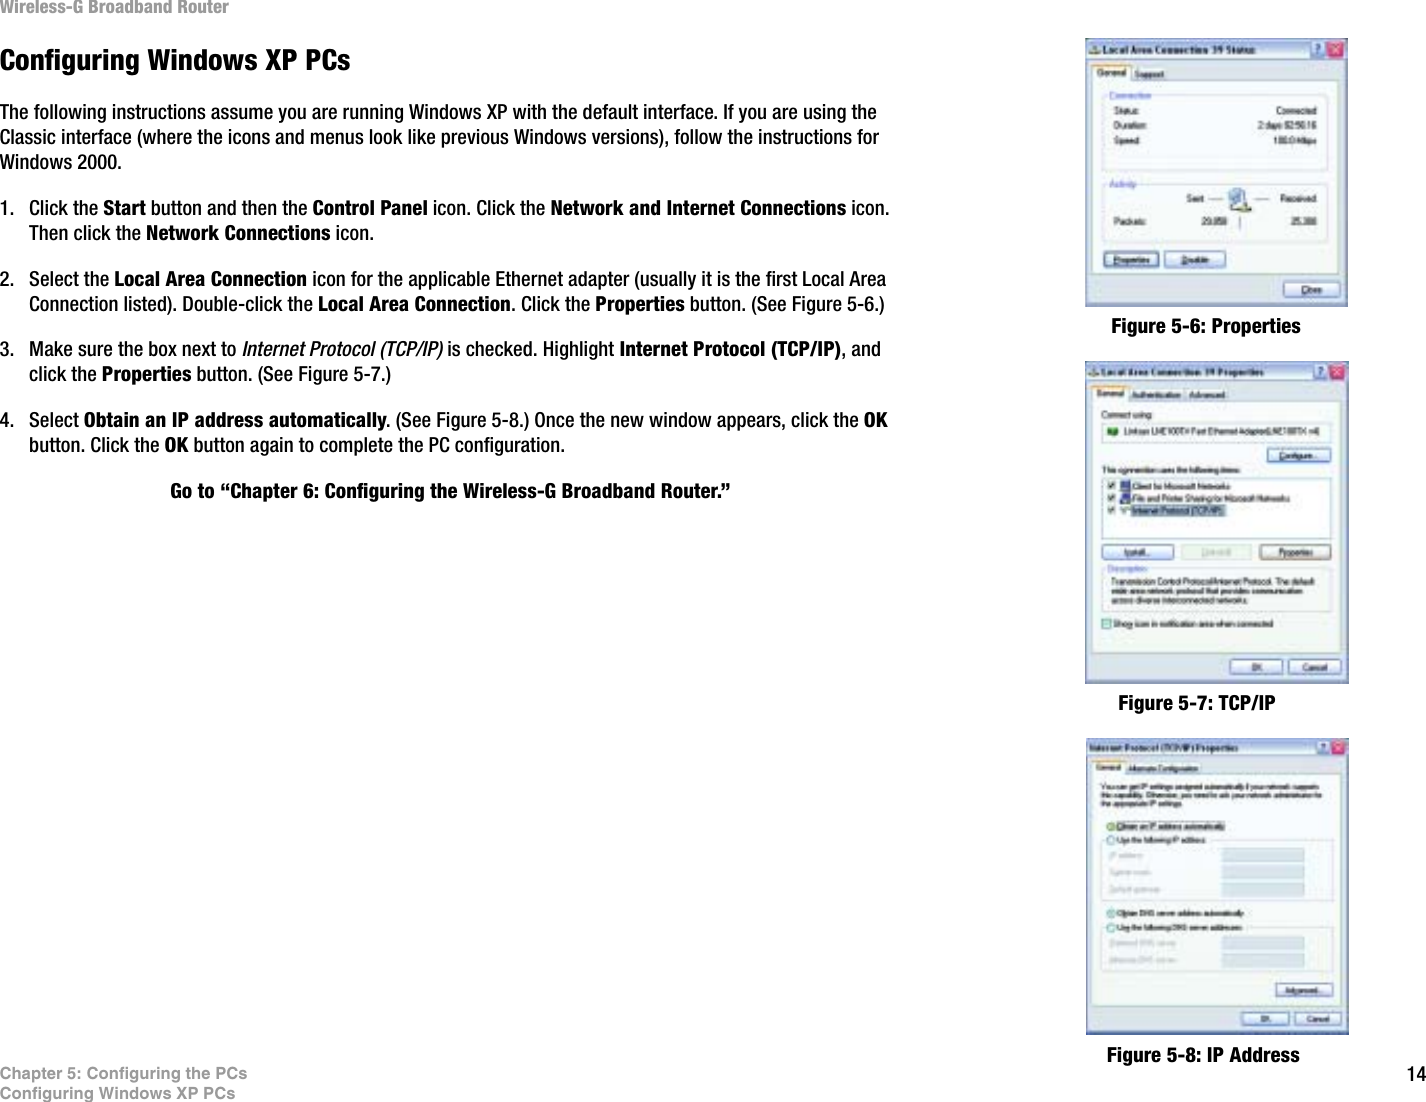 14Chapter 5: Configuring the PCsConfiguring Windows XP PCsWireless-G Broadband RouterConfiguring Windows XP PCsThe following instructions assume you are running Windows XP with the default interface. If you are using the Classic interface (where the icons and menus look like previous Windows versions), follow the instructions for Windows 2000.1. Click the Start button and then the Control Panel icon. Click the Network and Internet Connections icon. Then click the Network Connections icon.2. Select the Local Area Connection icon for the applicable Ethernet adapter (usually it is the first Local Area Connection listed). Double-click the Local Area Connection. Click the Properties button. (See Figure 5-6.)3. Make sure the box next to Internet Protocol (TCP/IP) is checked. Highlight Internet Protocol (TCP/IP), and click the Properties button. (See Figure 5-7.)4. Select Obtain an IP address automatically. (See Figure 5-8.) Once the new window appears, click the OKbutton. Click the OK button again to complete the PC configuration.Go to “Chapter 6: Configuring the Wireless-G Broadband Router.”Figure 5-6: PropertiesFigure 5-7: TCP/IPFigure 5-8: IP Address